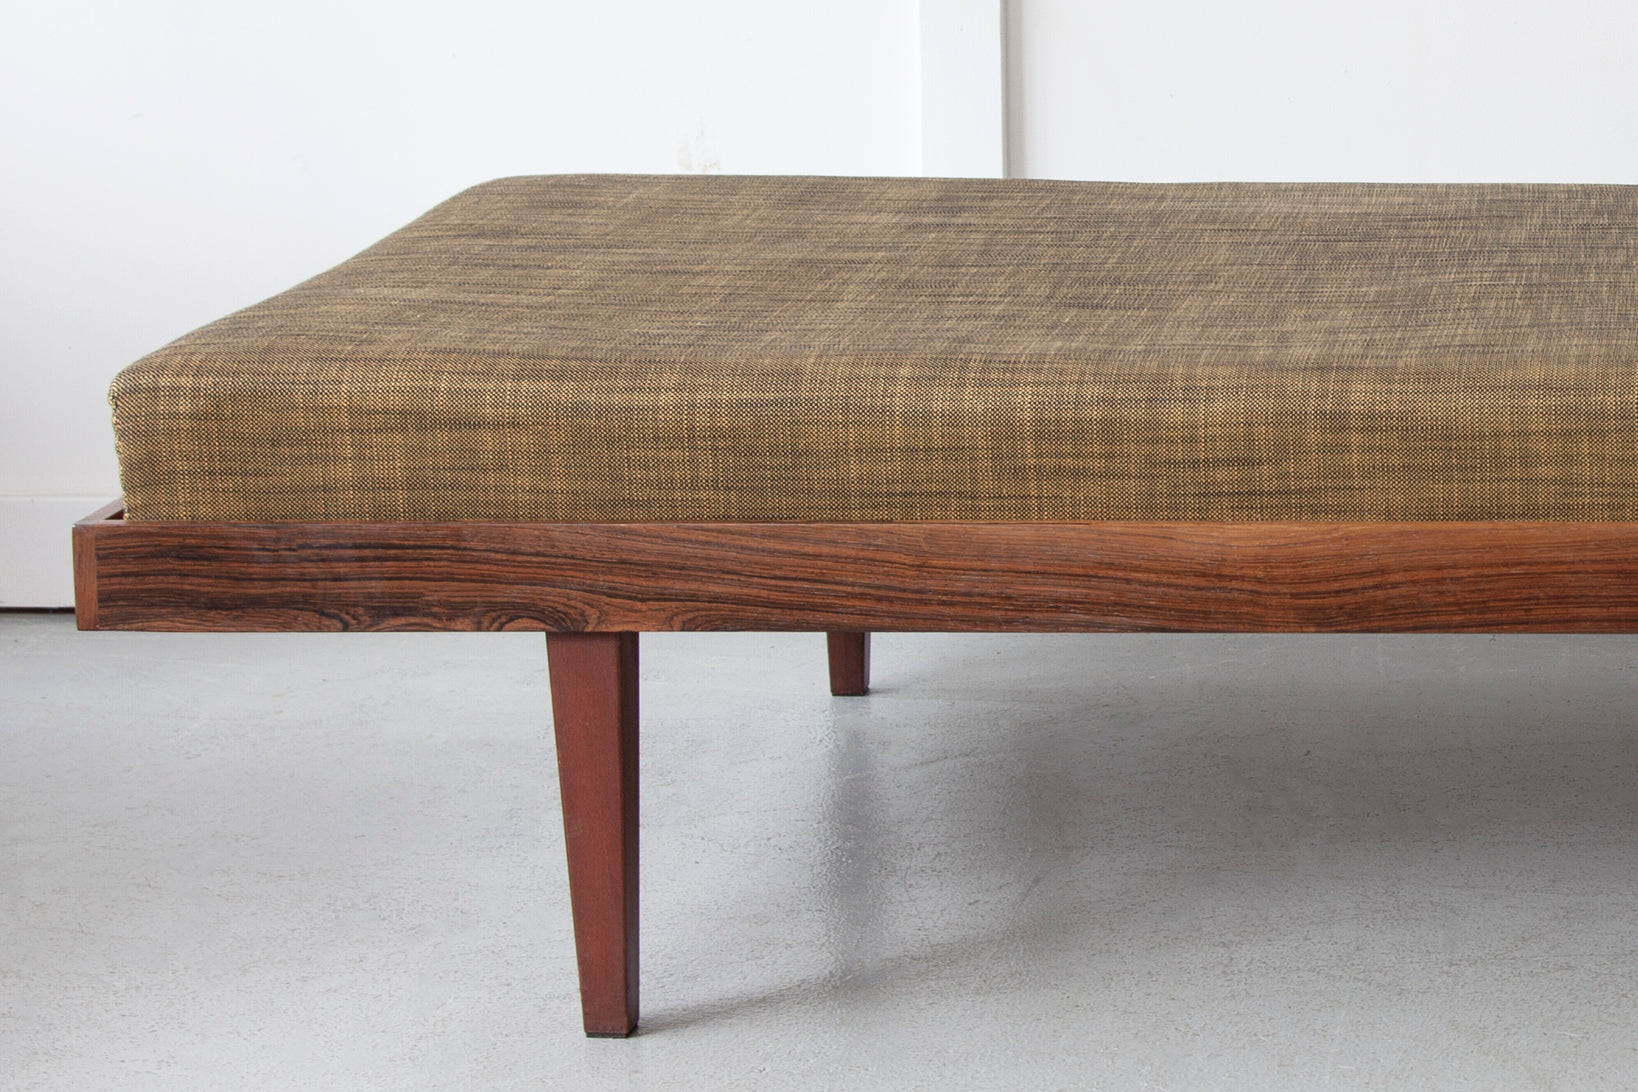 Rosewood Daybed by Horsens Møbelfabrik